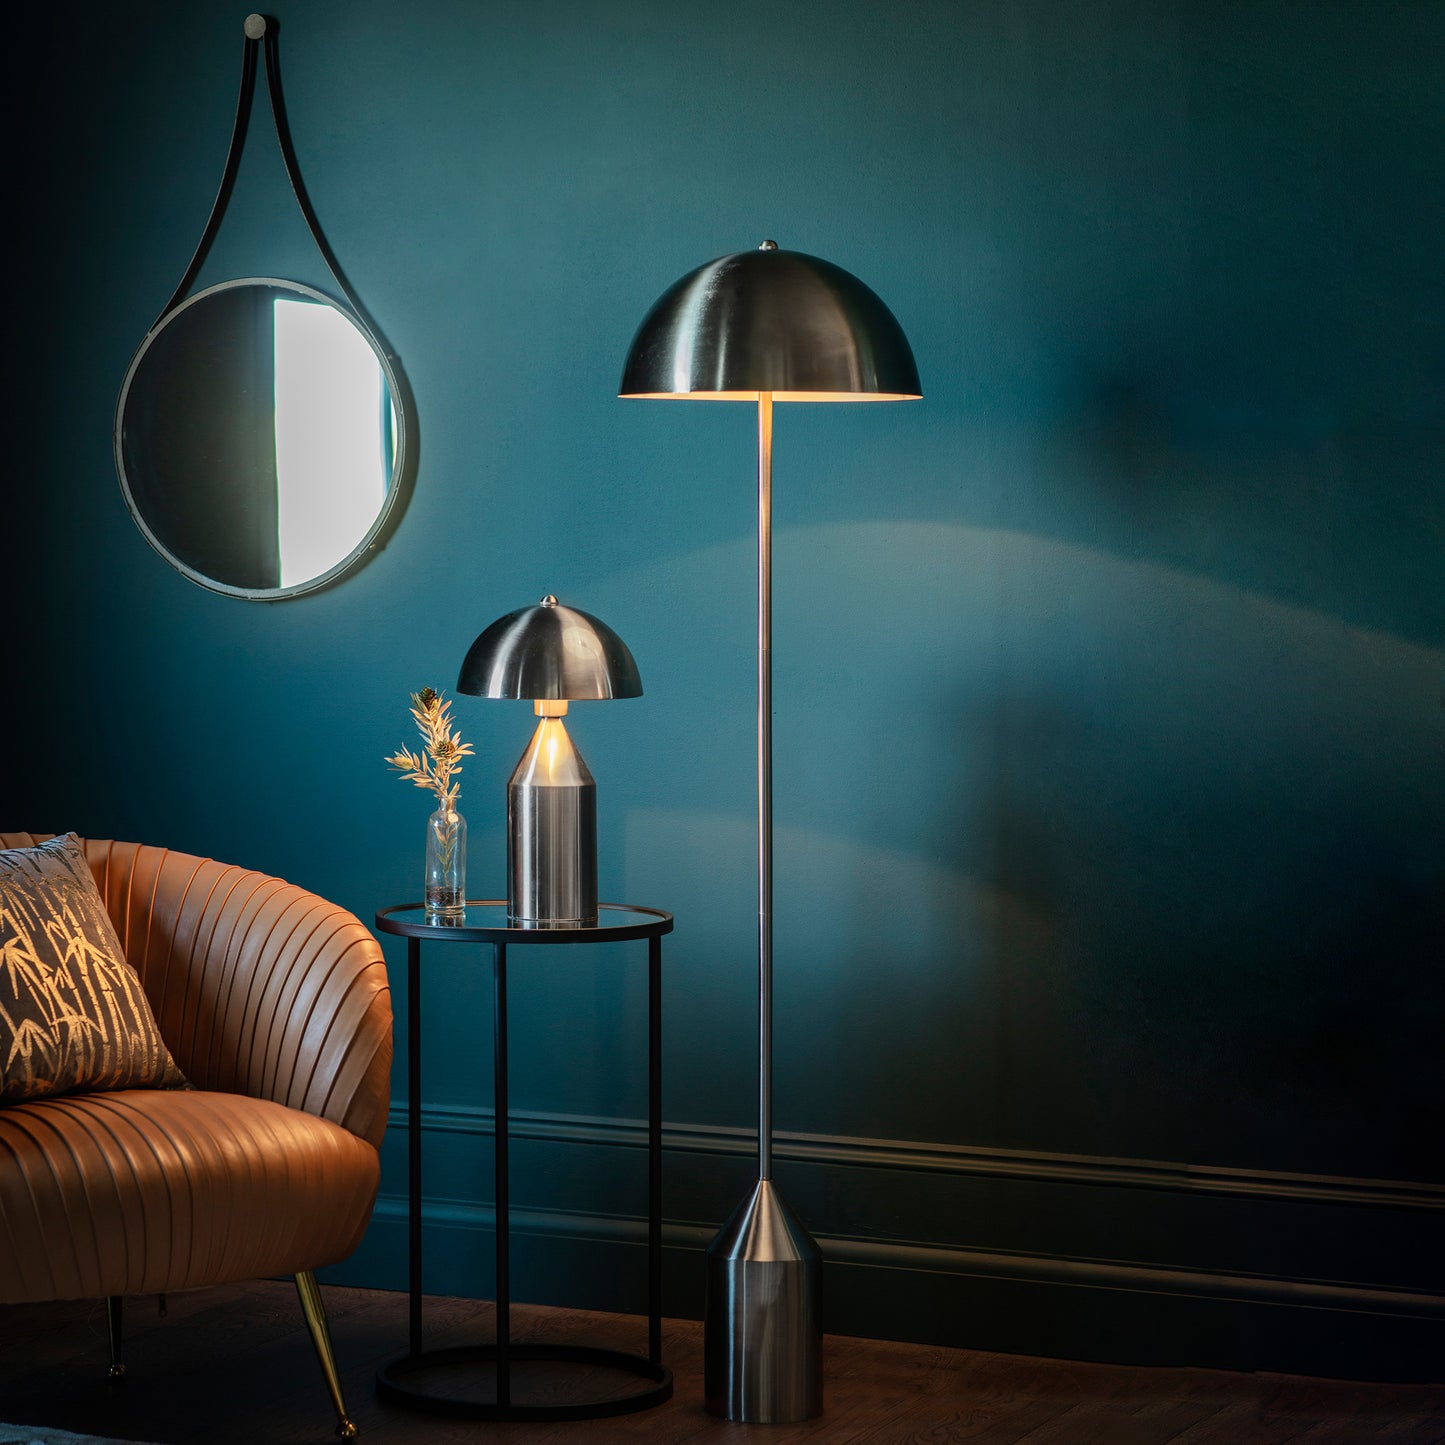 A Nova Table Lamp by Kikiathome.co.uk and a mirror in an interior decor with blue walls.